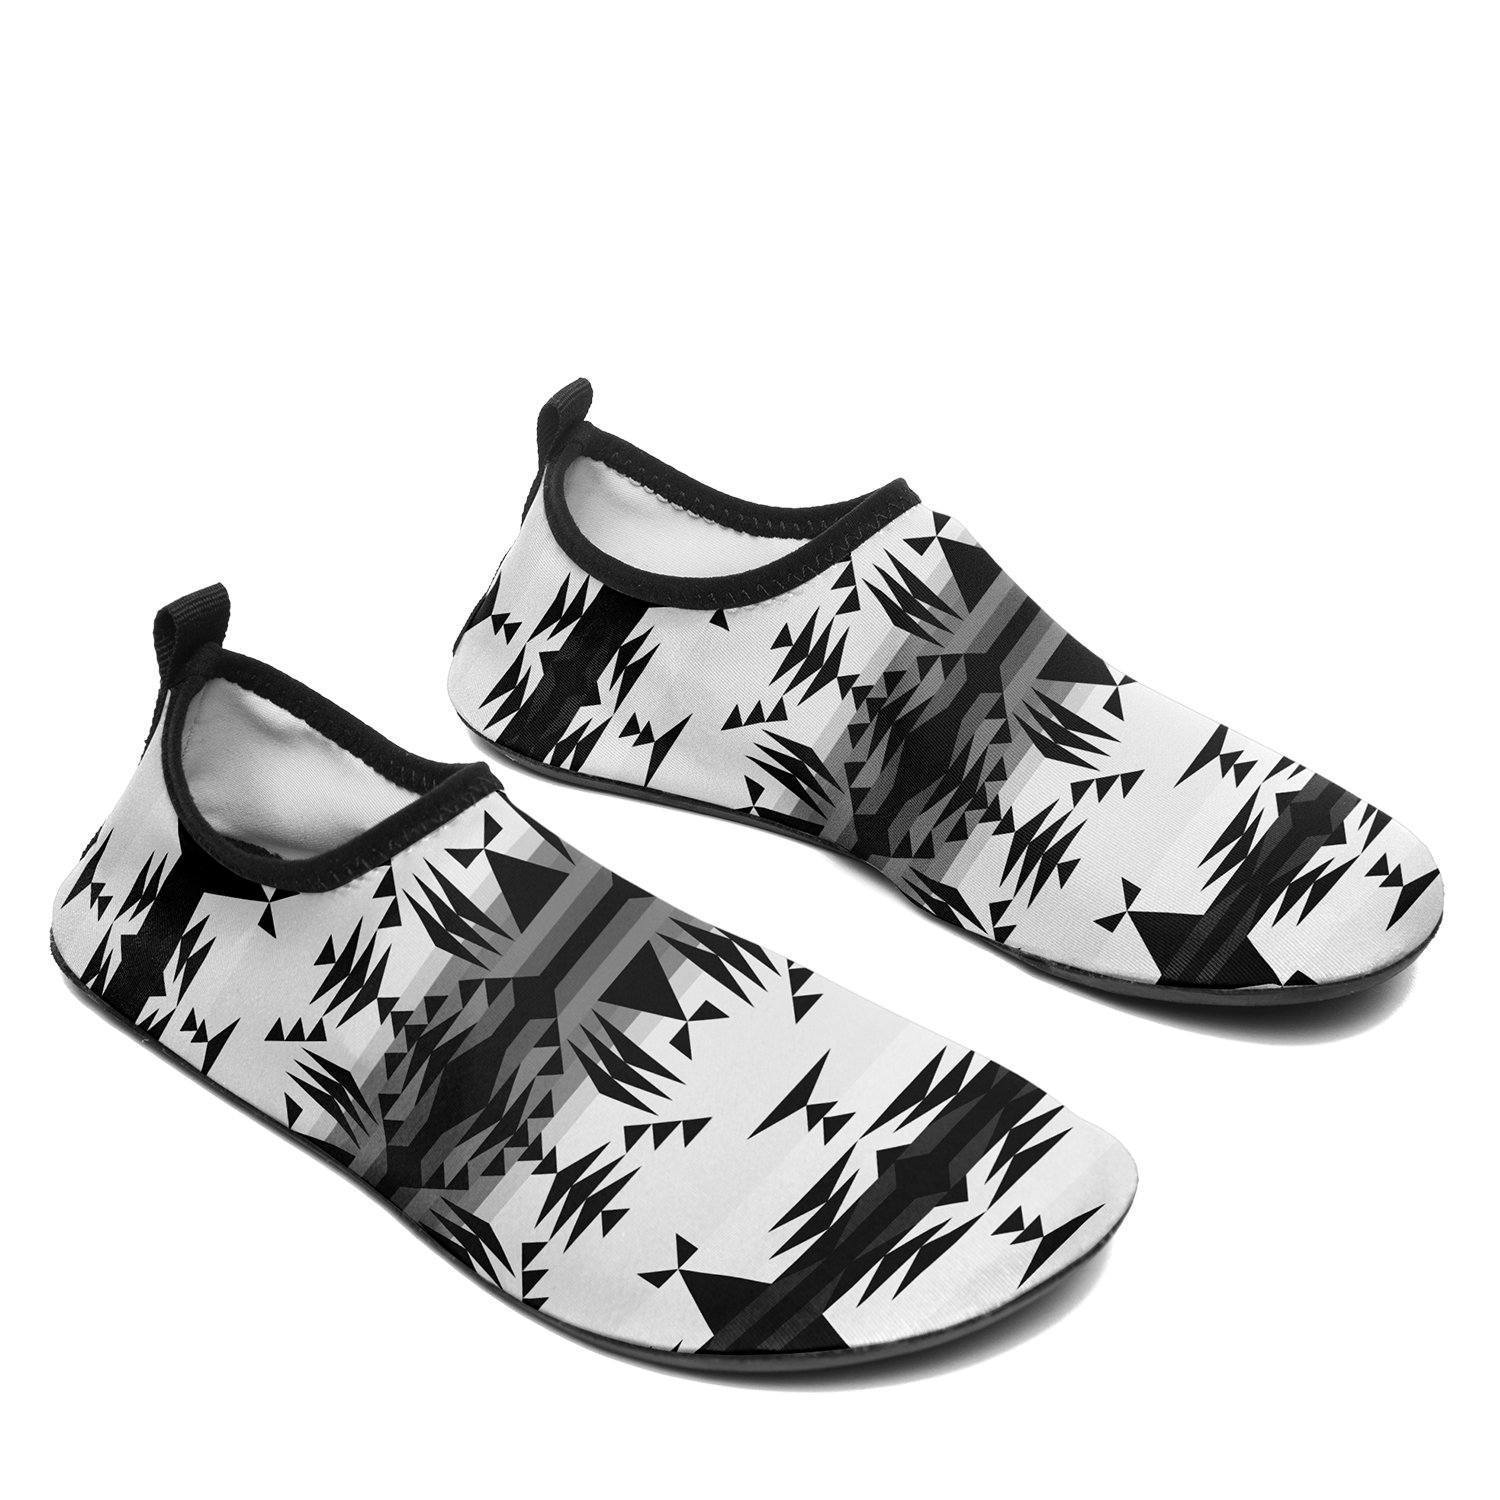 Between the Mountains White and Black Sockamoccs Kid's Slip On Shoes 49 Dzine 